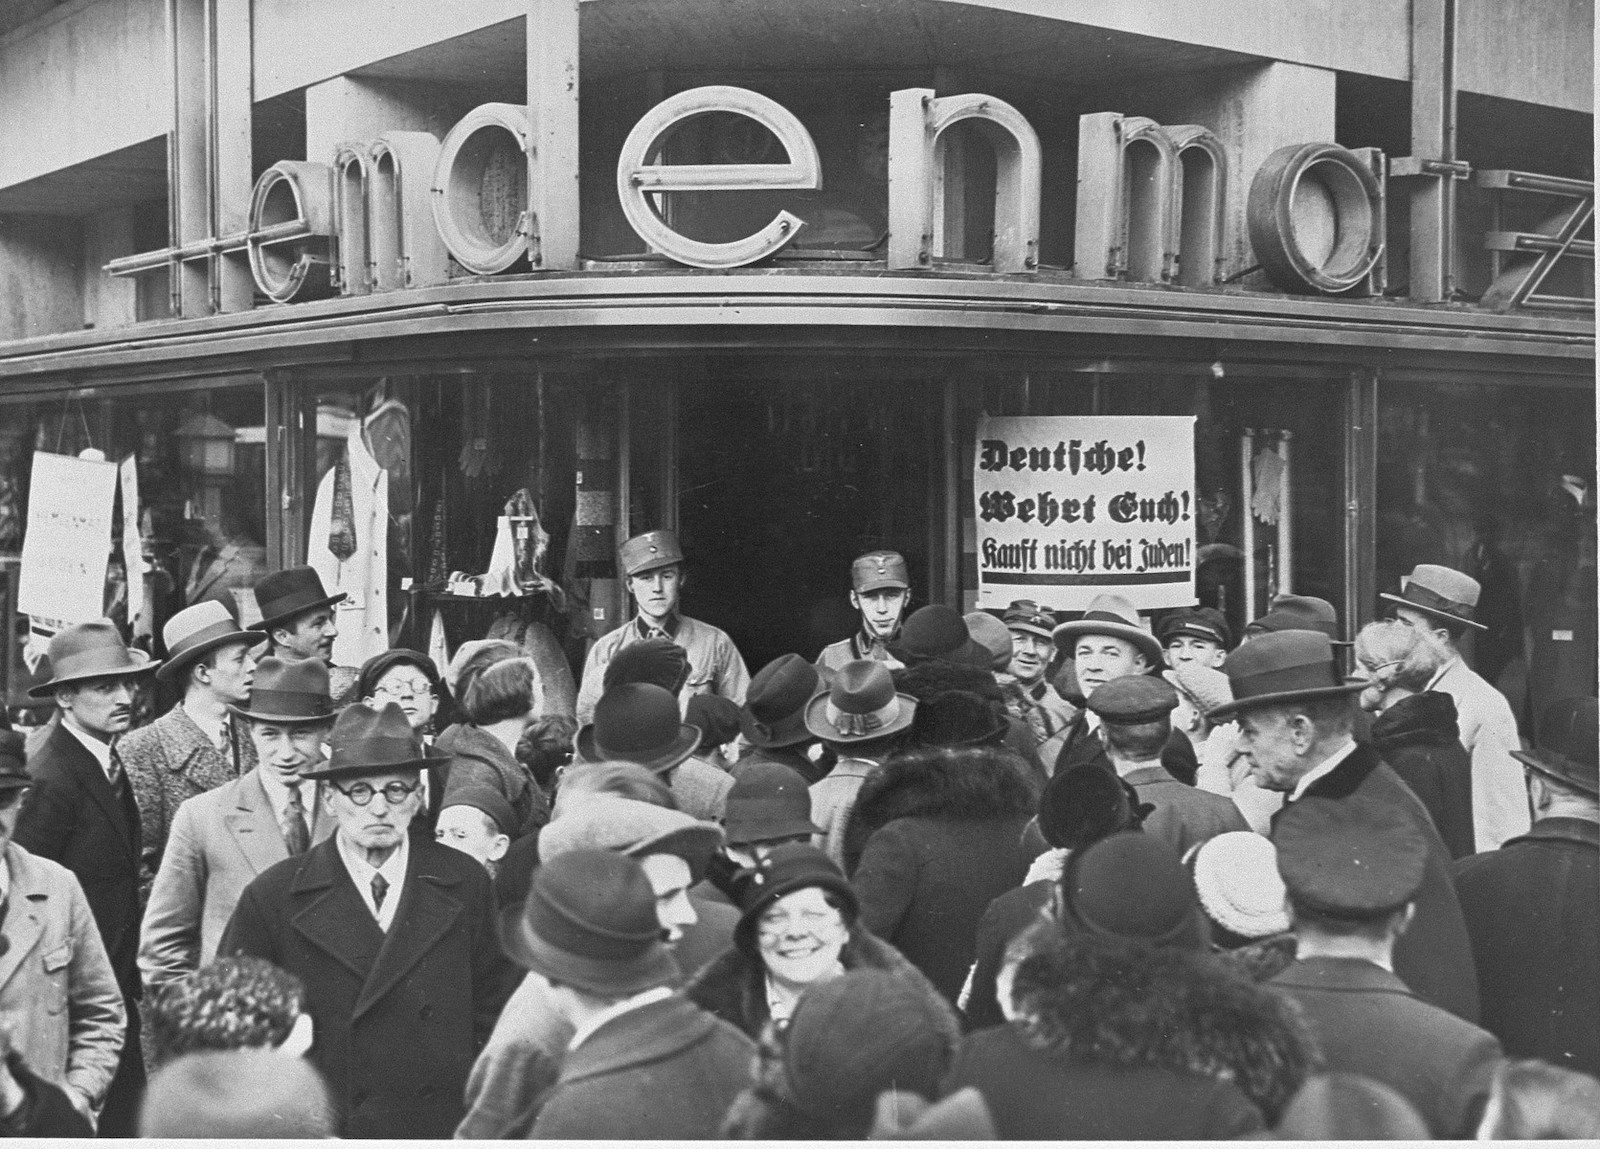 A crowd of Germans outside of a Jewish-owned department store in Berlin on the first day of the Nazi boycott of Jewish-owned businesses, 1 April 1933. United States Holocaust Memorial Museum, courtesy of National Archives. Public Domain.